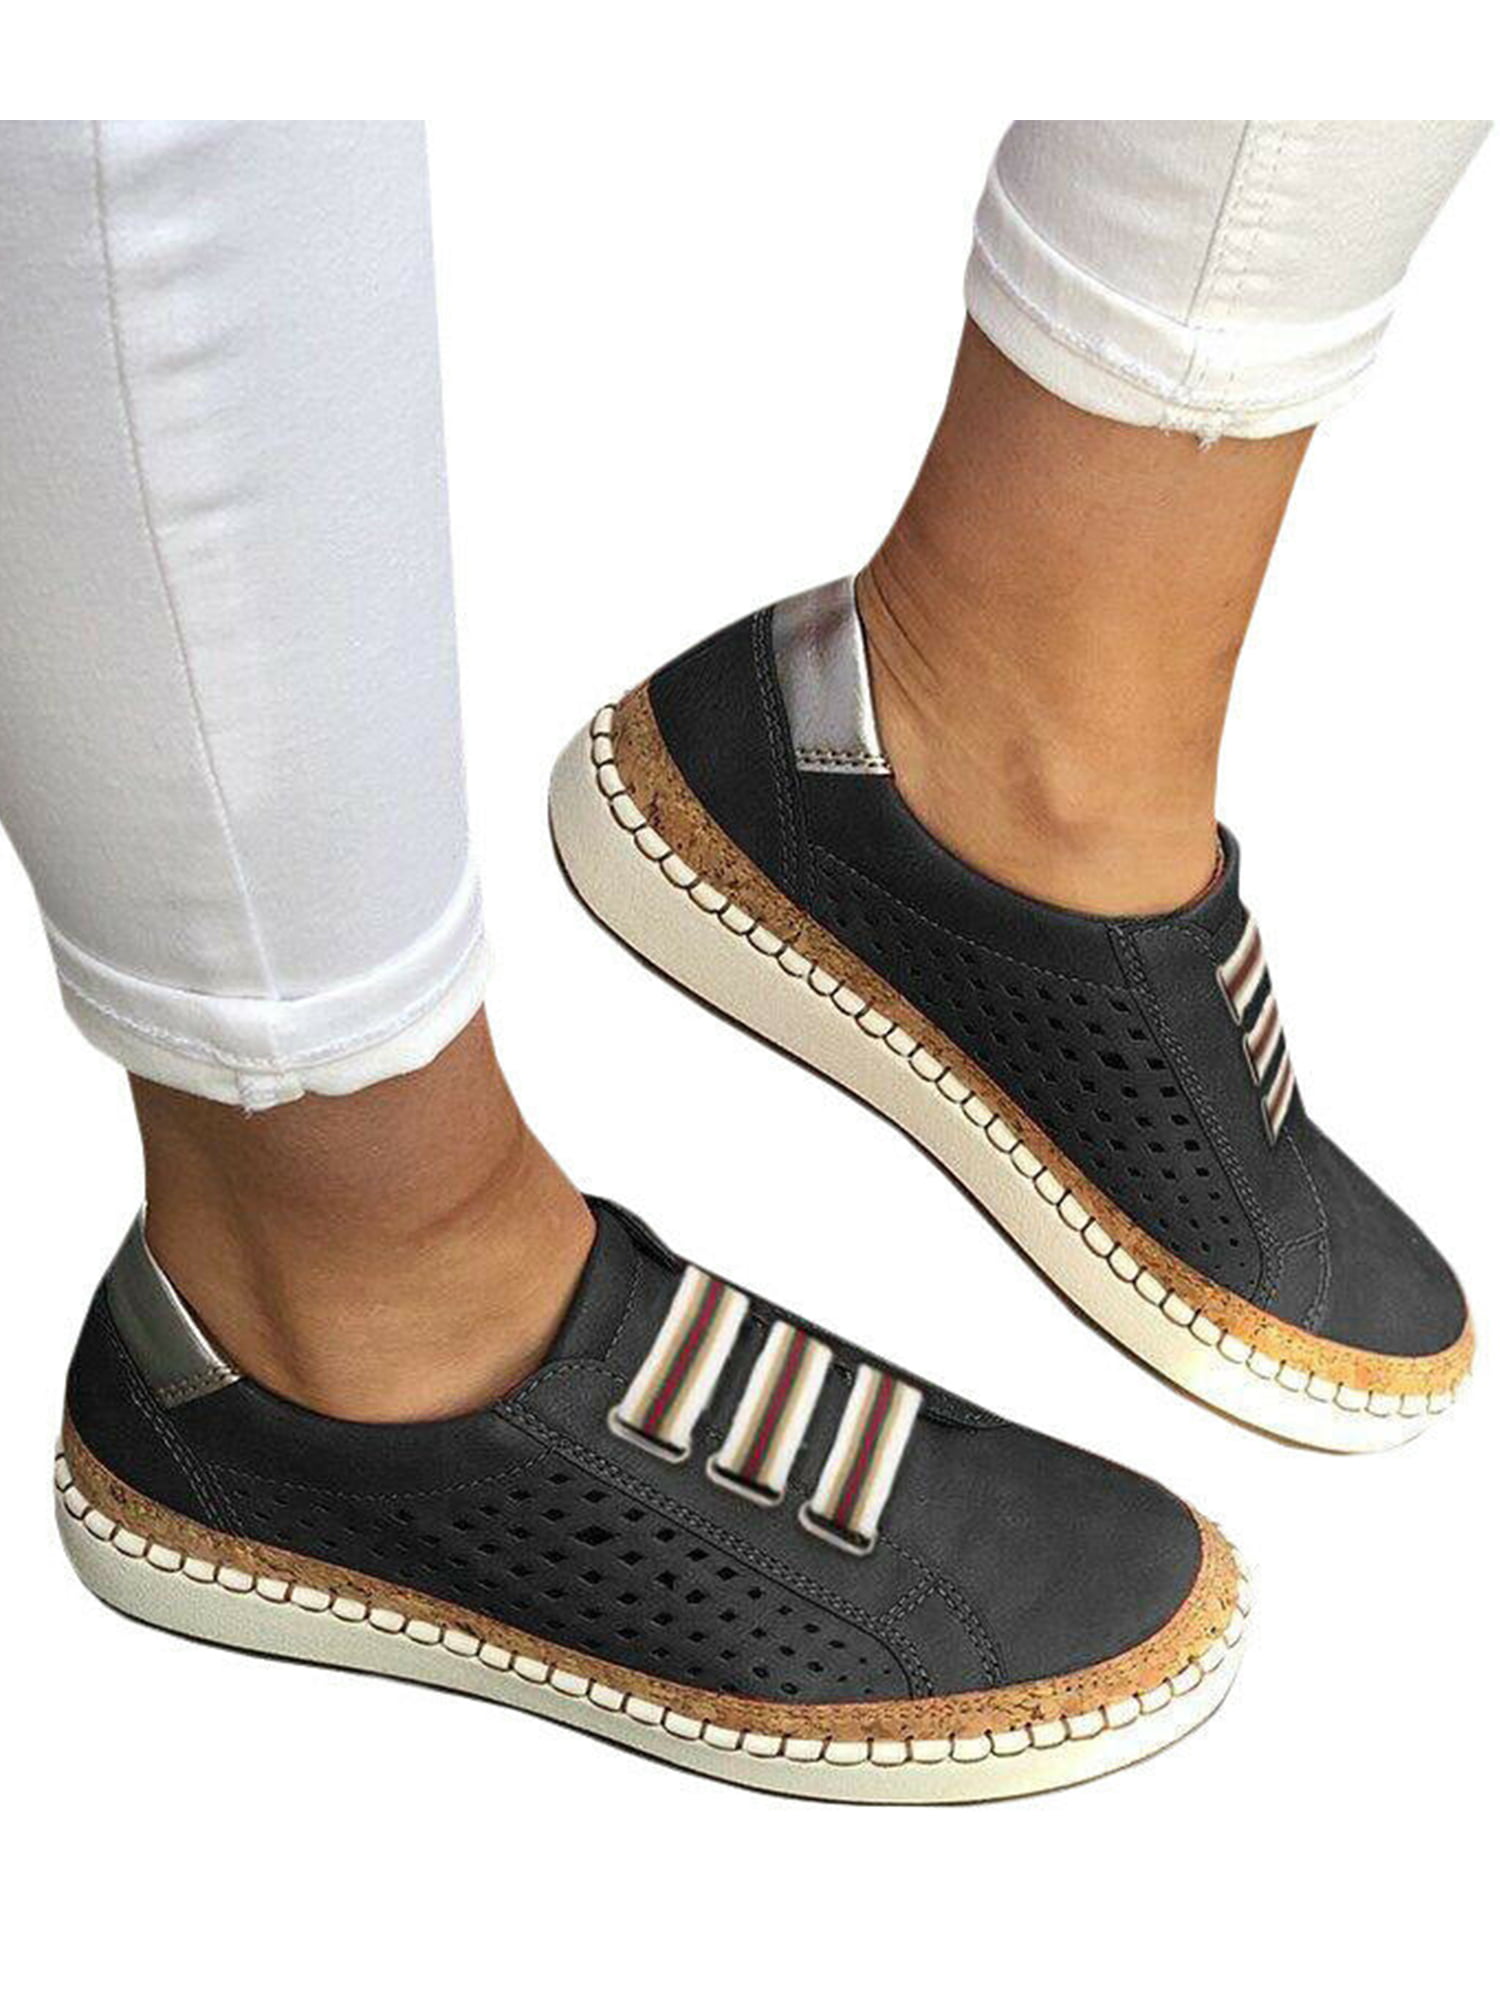 CUTUDE Womens Flat with Sneakers Casual Hollow-Out Slippers Round Toe Slip On Shoes Fashion 